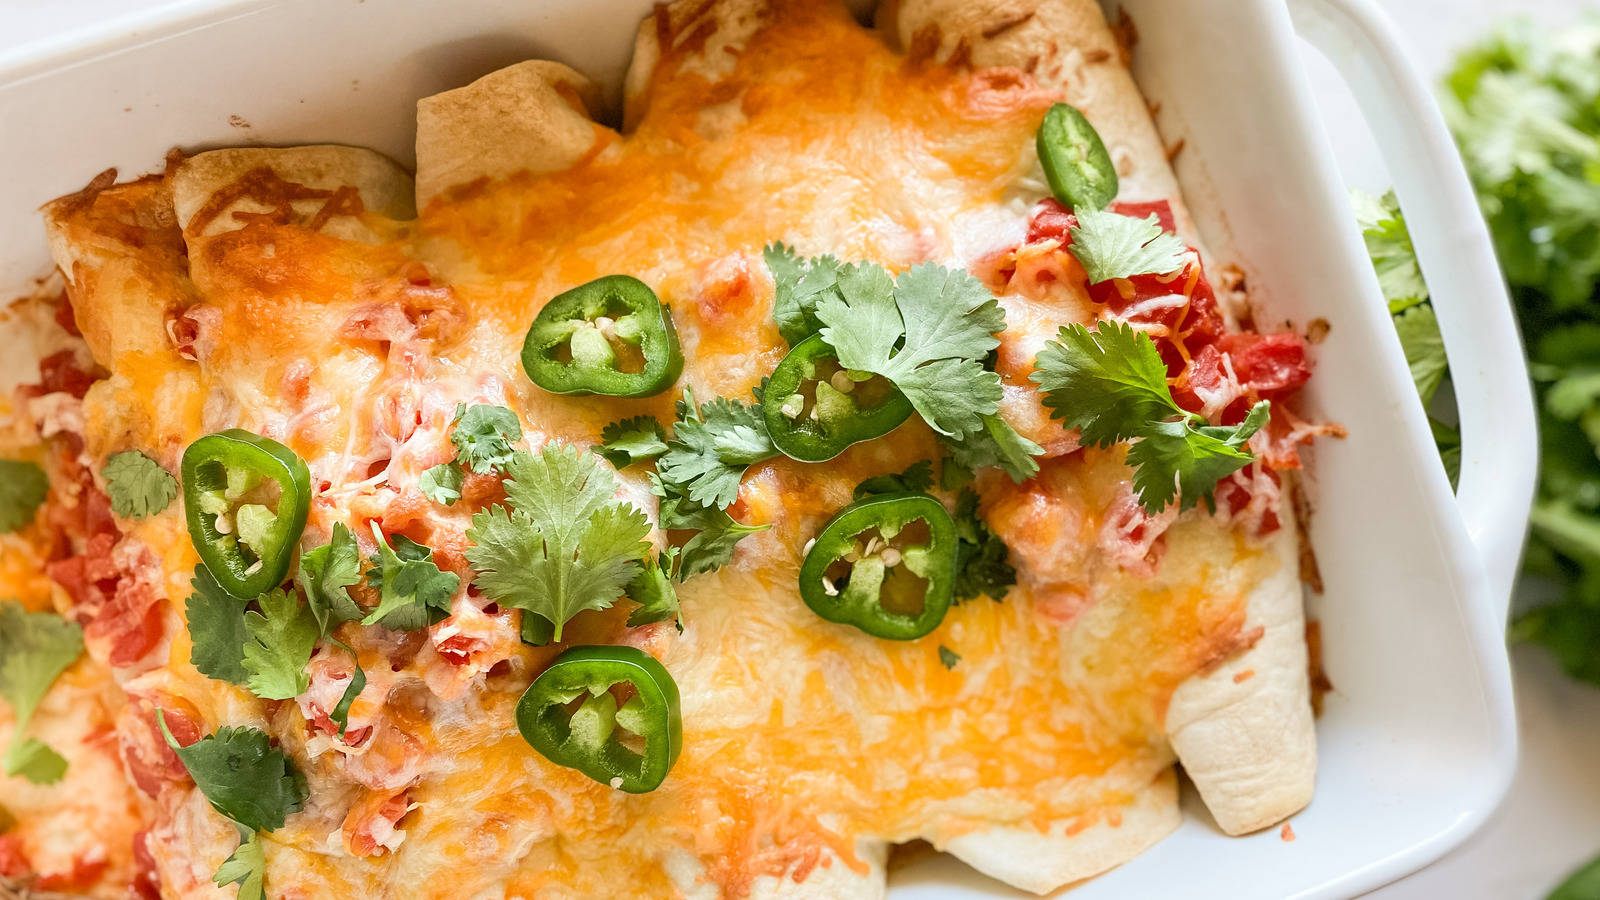 Baked Enchiladas With Savory Sauce Wallpaper